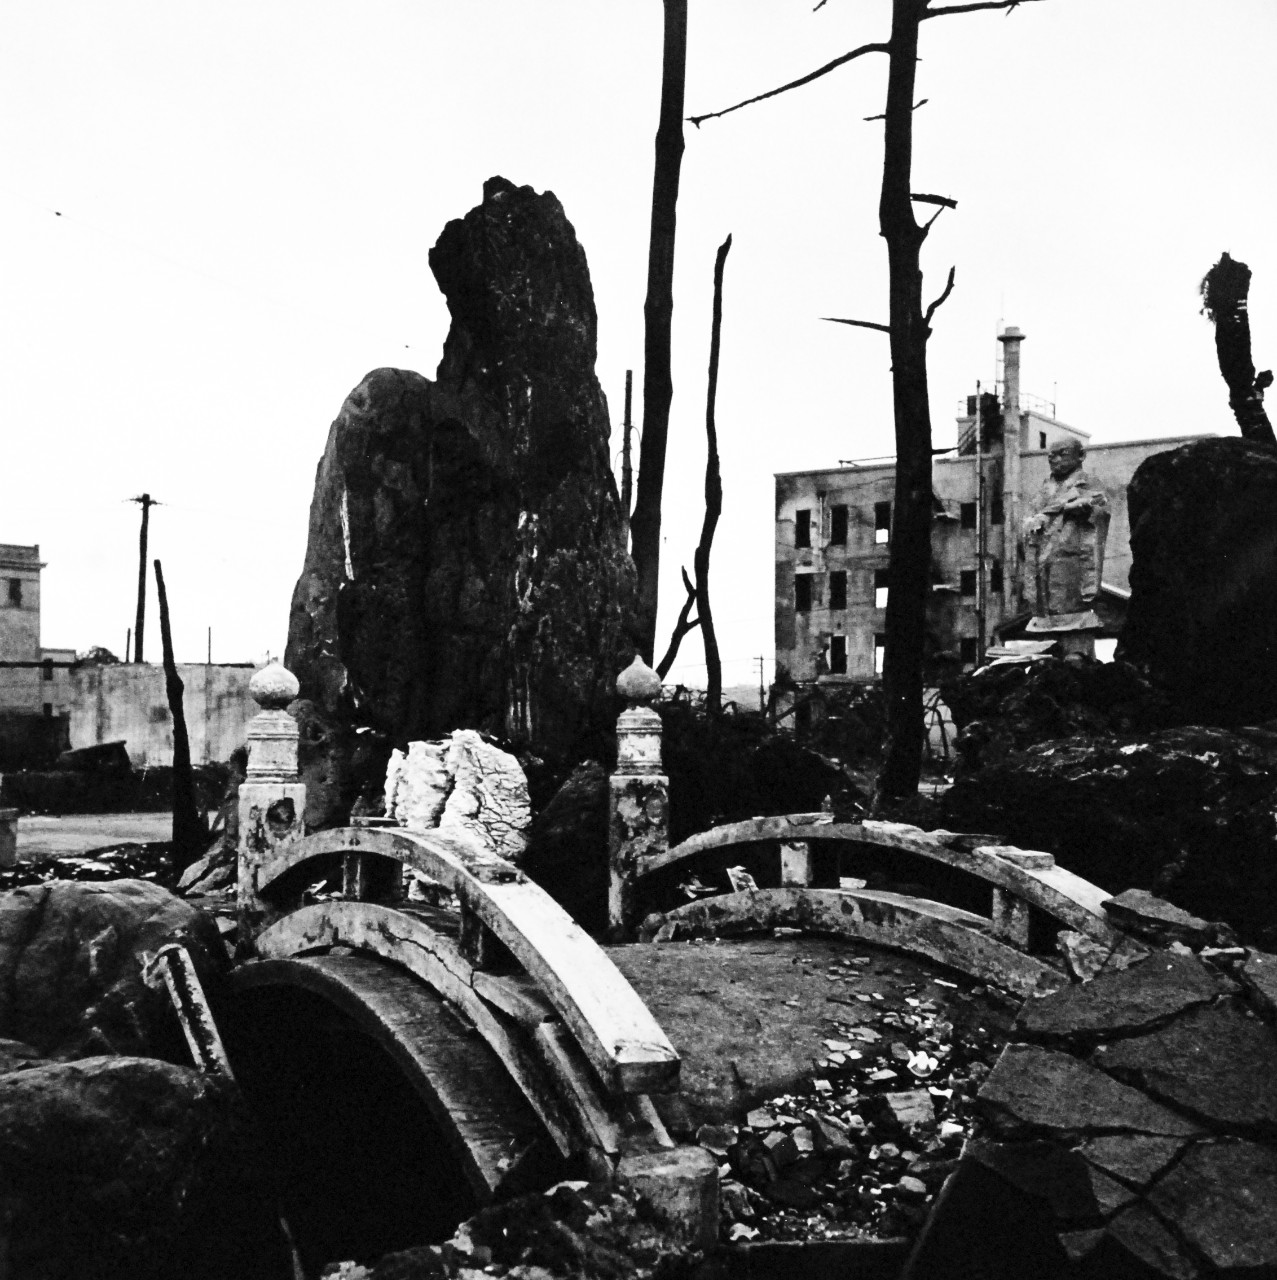 80-G-473746 (TR-15632):  Hiroshima, Japan, 1945.  Navy Photographer photographing devastation created by U.S. bombings at Yokohama, Japan, during World War.  Photographed by Lieutenant Wayne Miller, September 1945.  Official U.S. Navy photograph, now in the collections of the National Archives.  (2015/11/10).